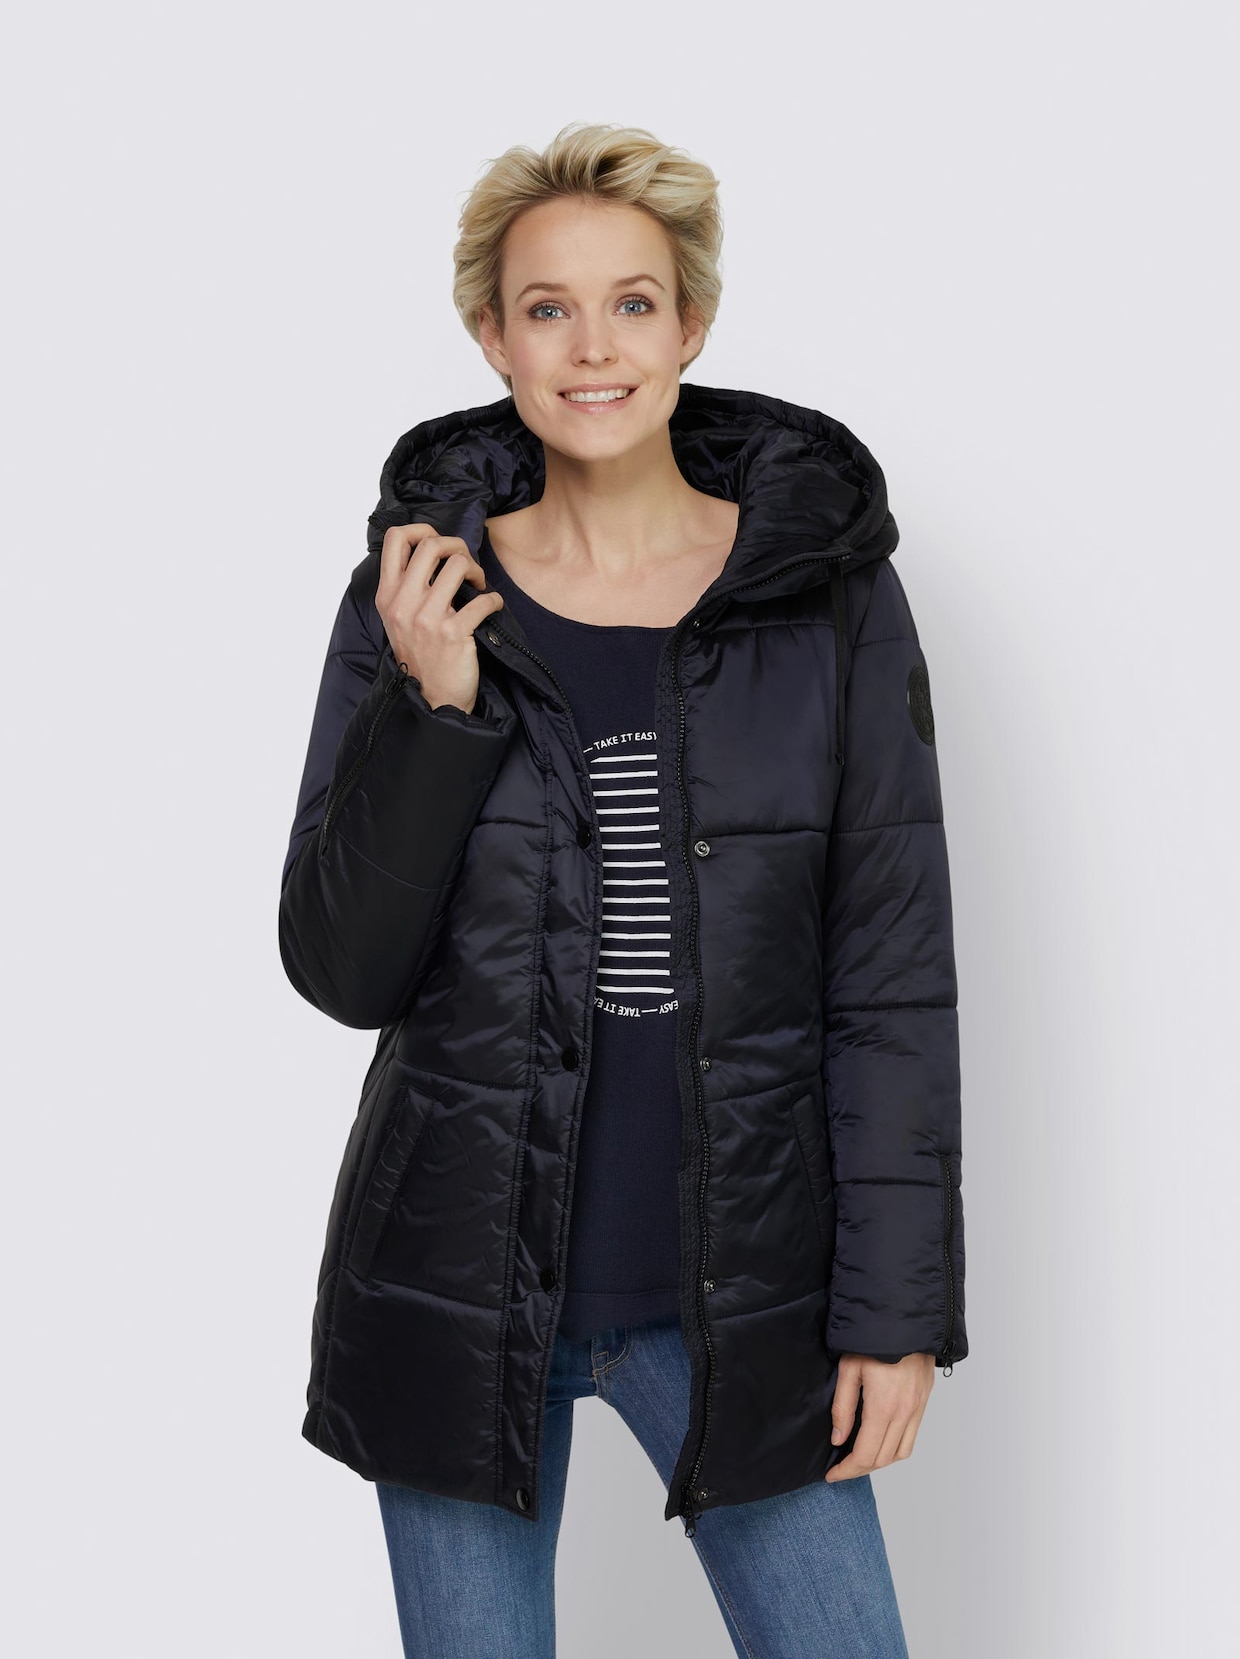 Best Connections Jacke - marine